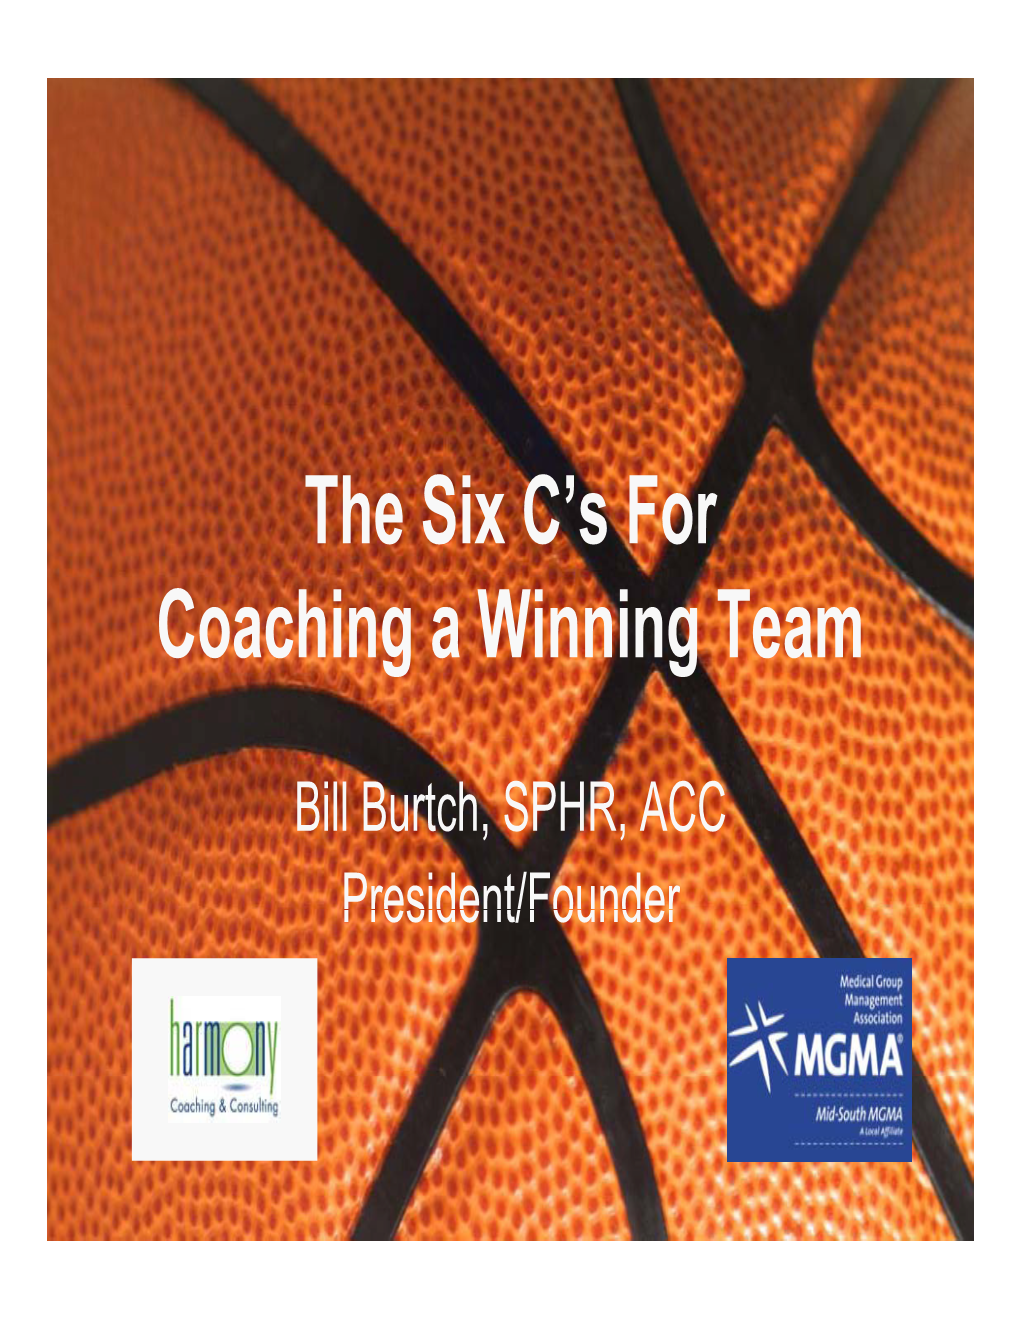 The Six C's for Coaching a Winning Team